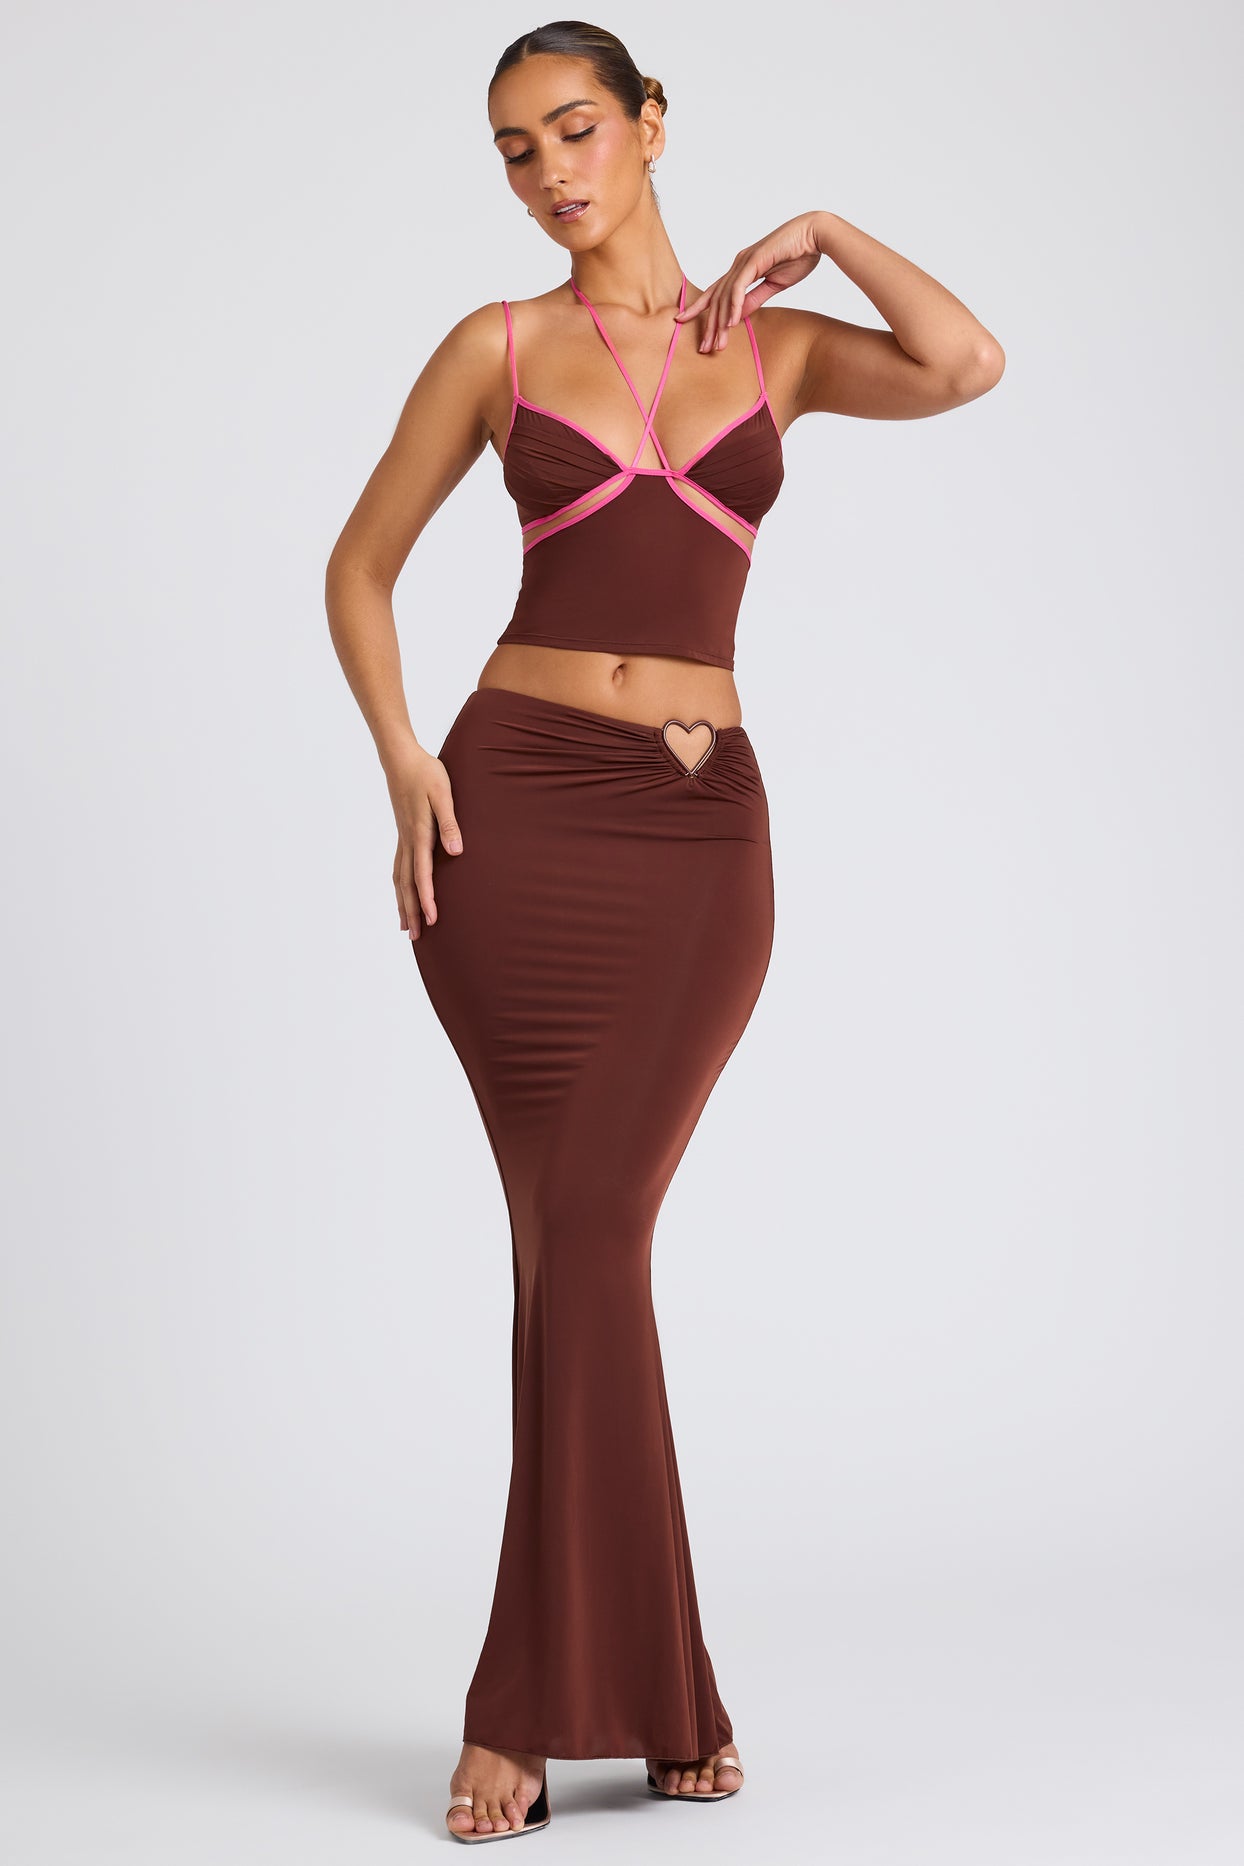 Mid Rise Maxi Skirt in Chocolate Brown